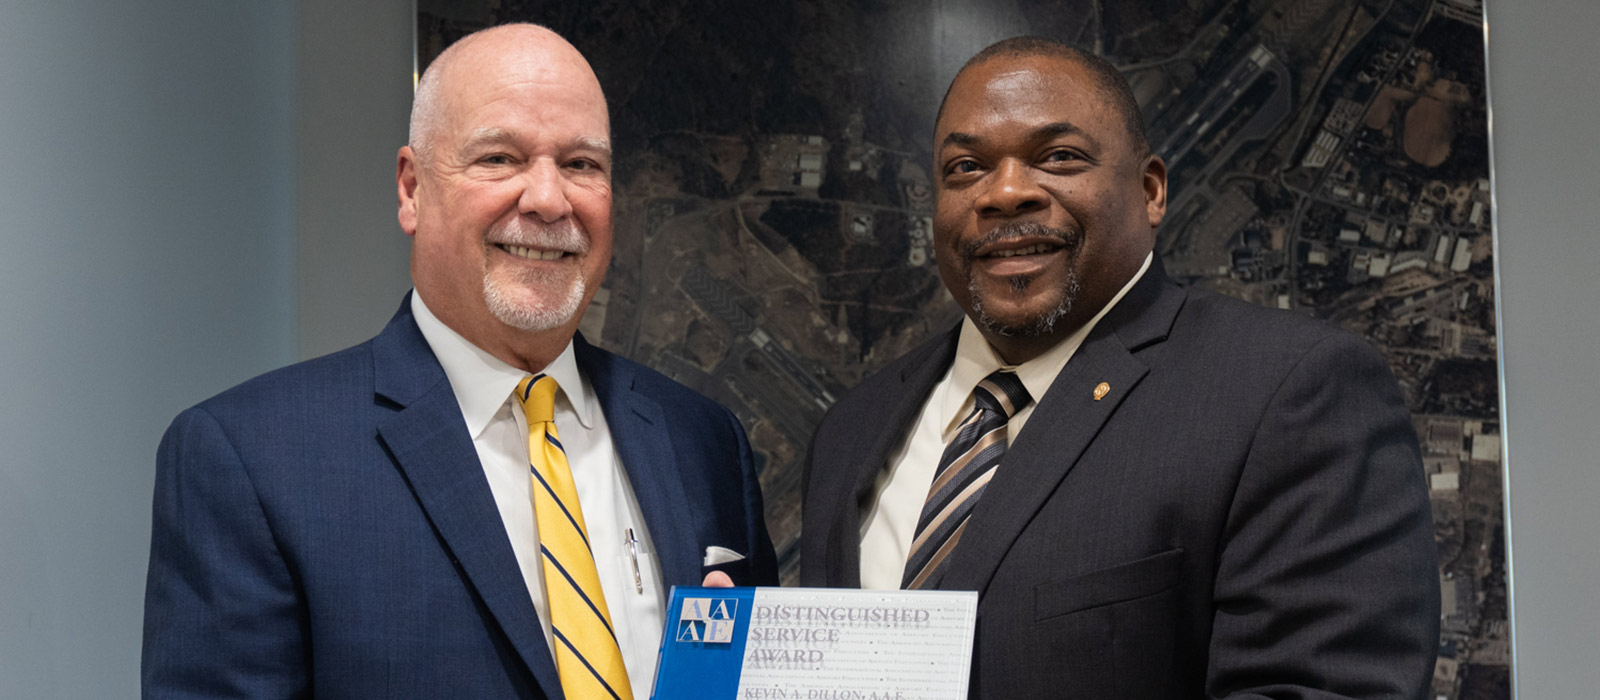 Featured image for CAA Executive Director Kevin Dillon Honored with Distinguished Service Award from American Association of Airport Executives